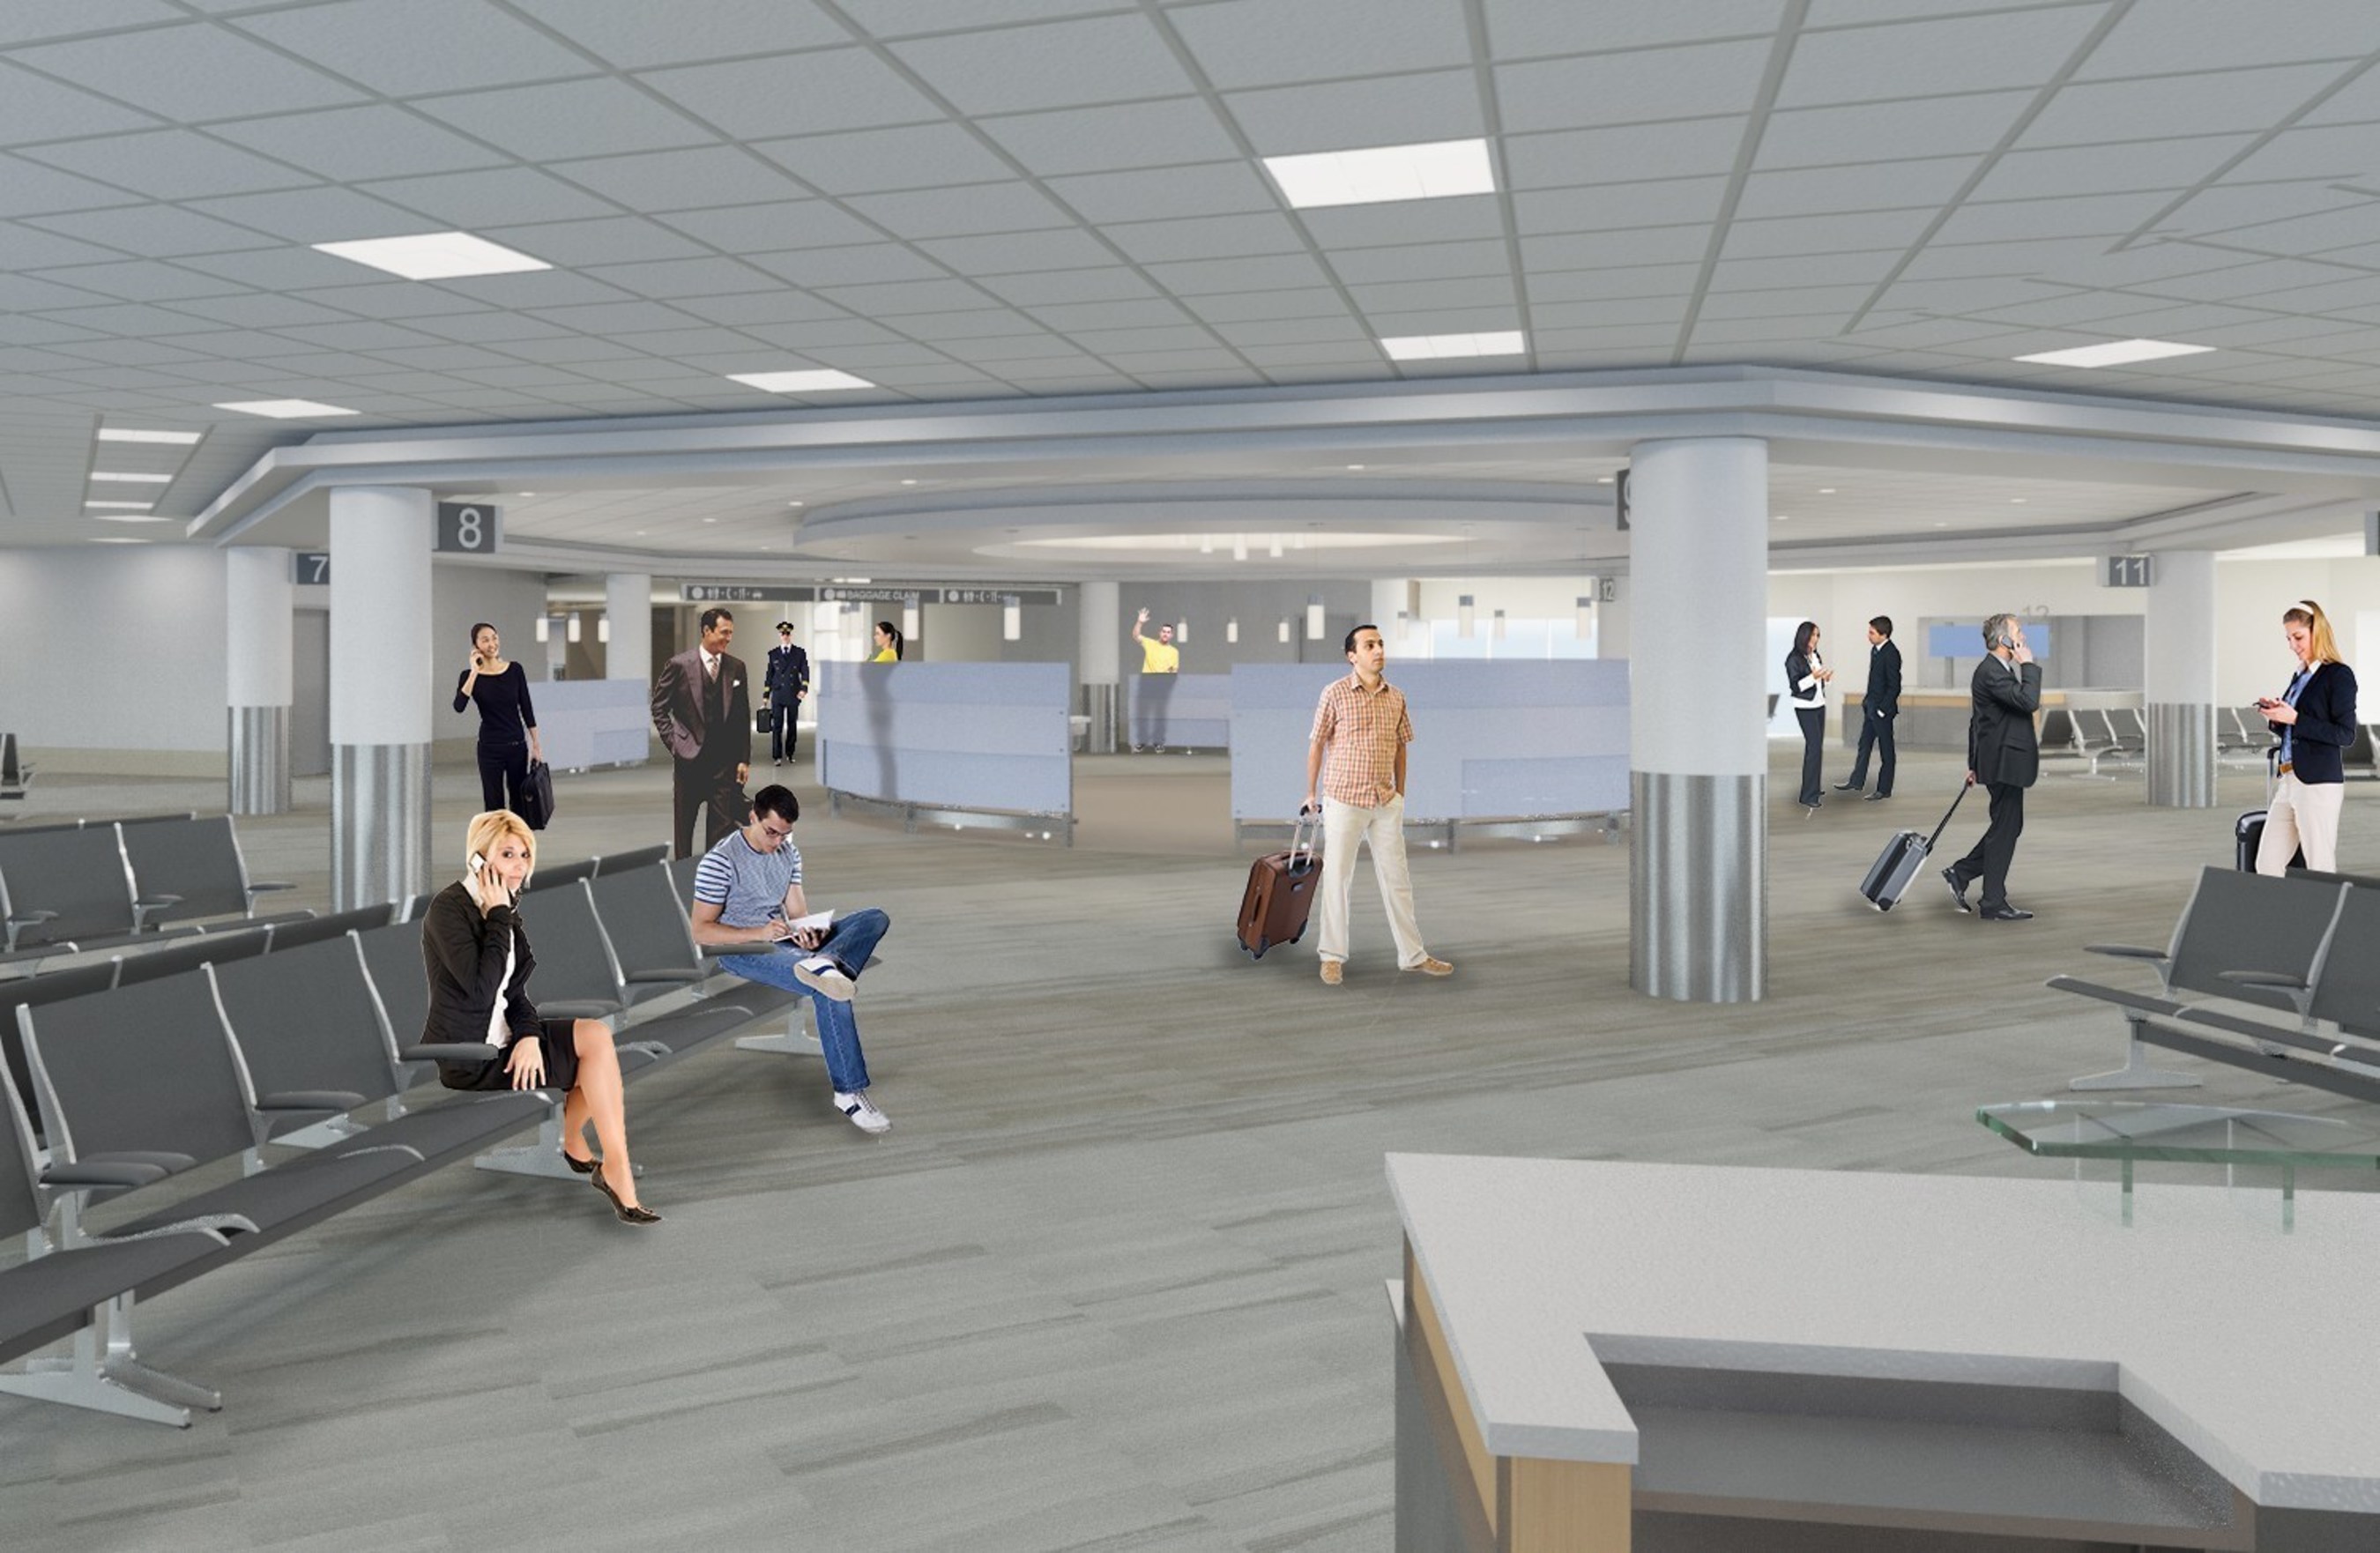 A $20.6 million concourse renovation at Clinton National Airport includes new gate seating with in-seat recharge, faster Wi-Fi with speeds above 100 Mbps up and down, per device, and better cell phone connectivity with installation of a distributed antenna system.